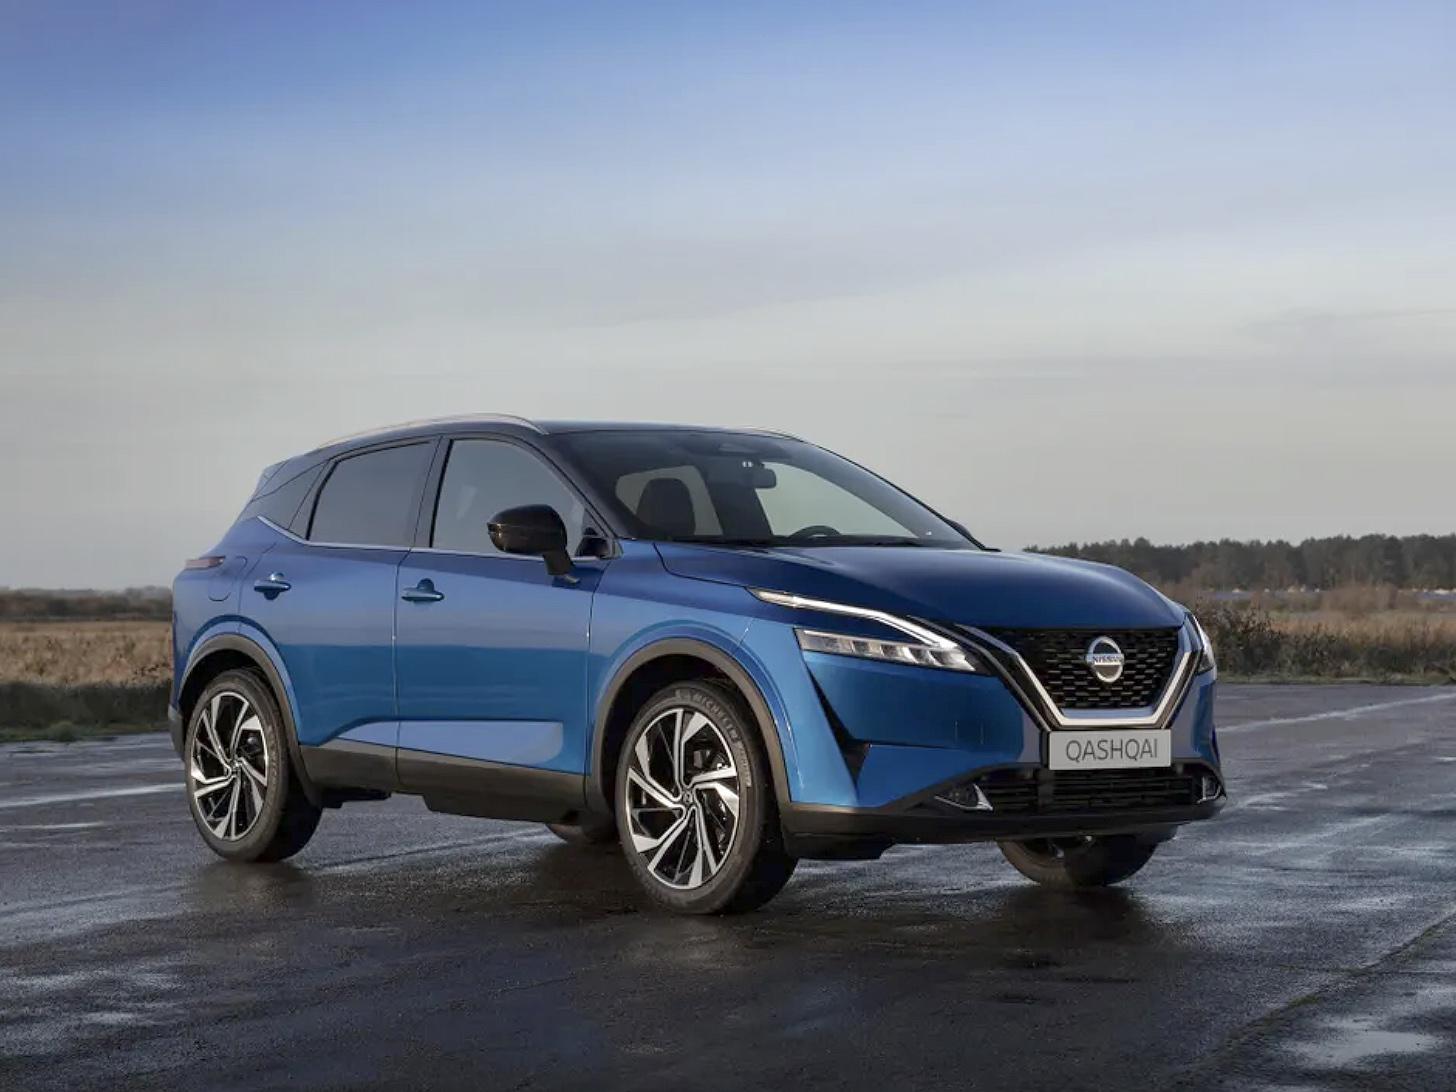 The Nissan Qashqai has been redesigned for the 2022 model year.